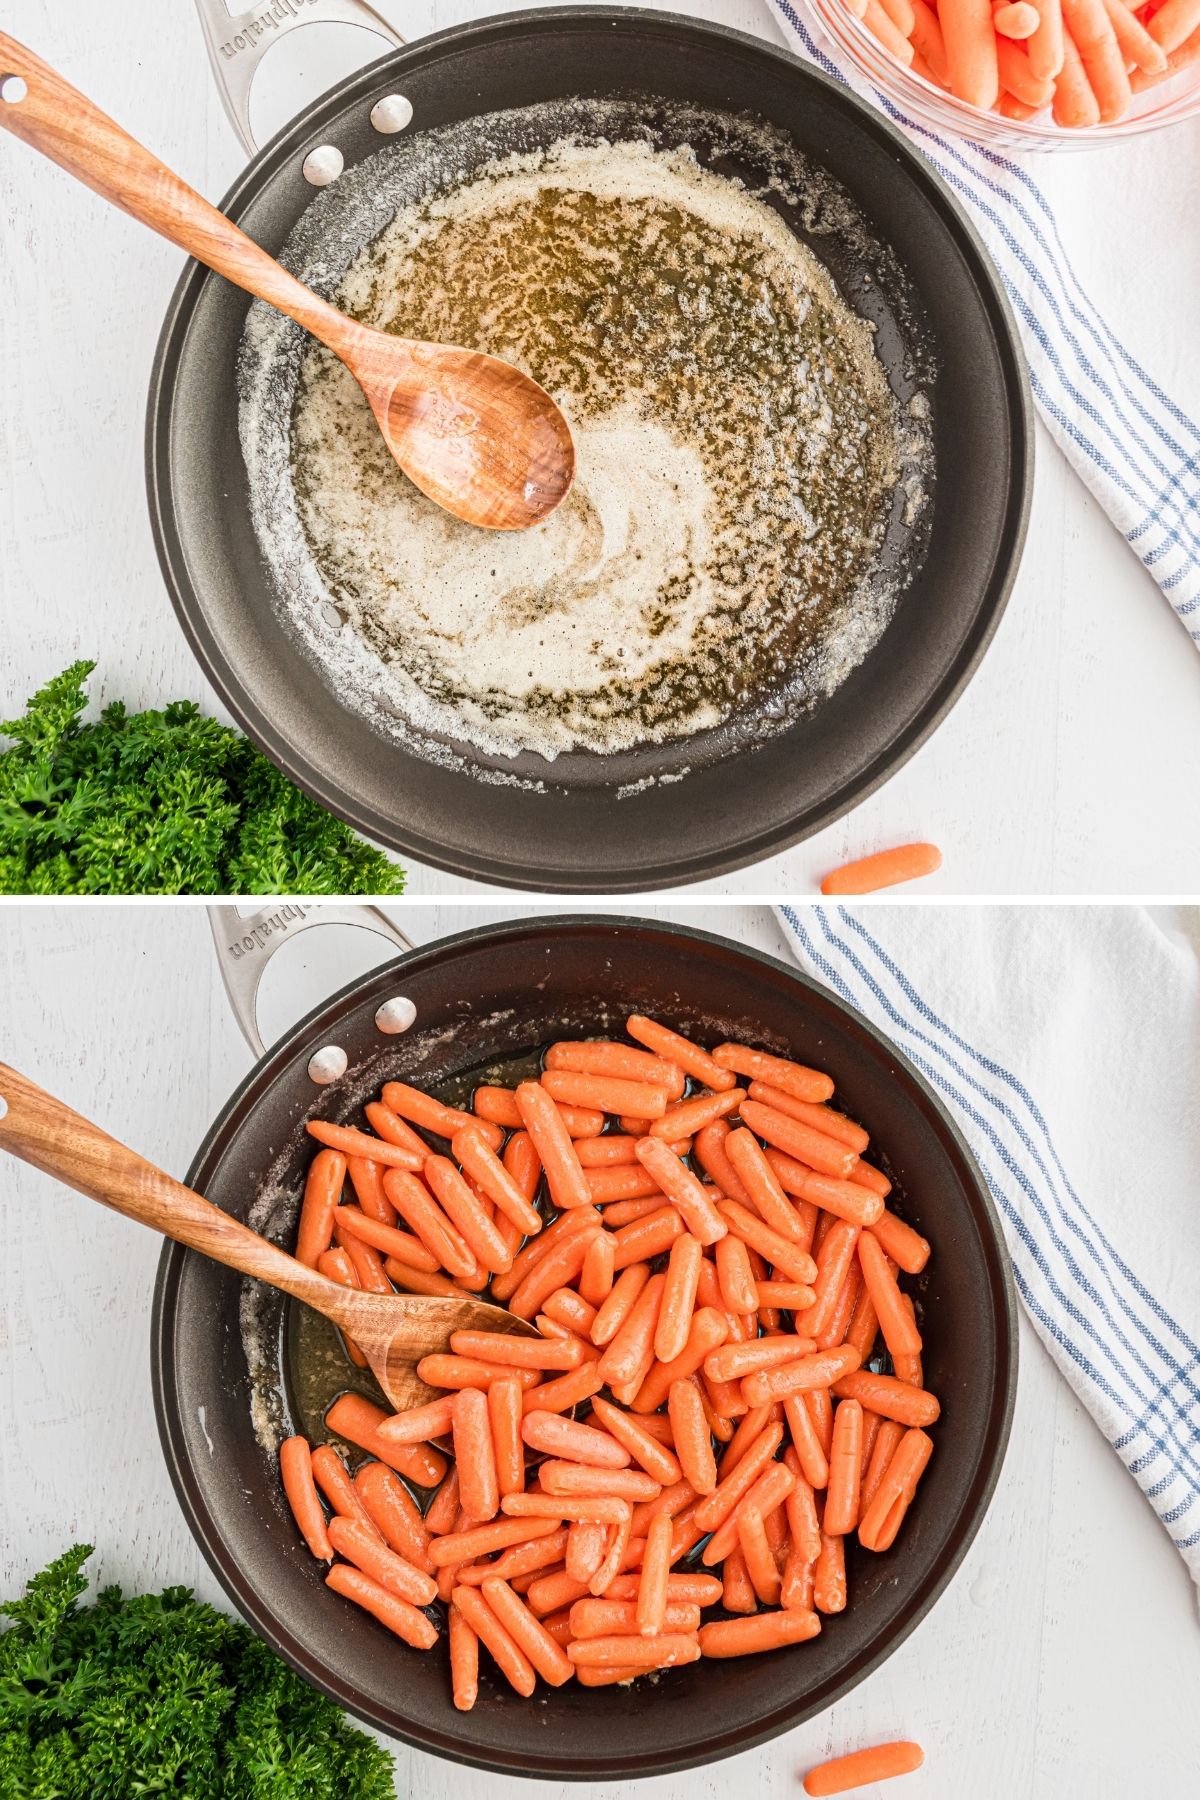 two pans: first with butter and brown sugar; second with added baby carrots and a wooden spoon